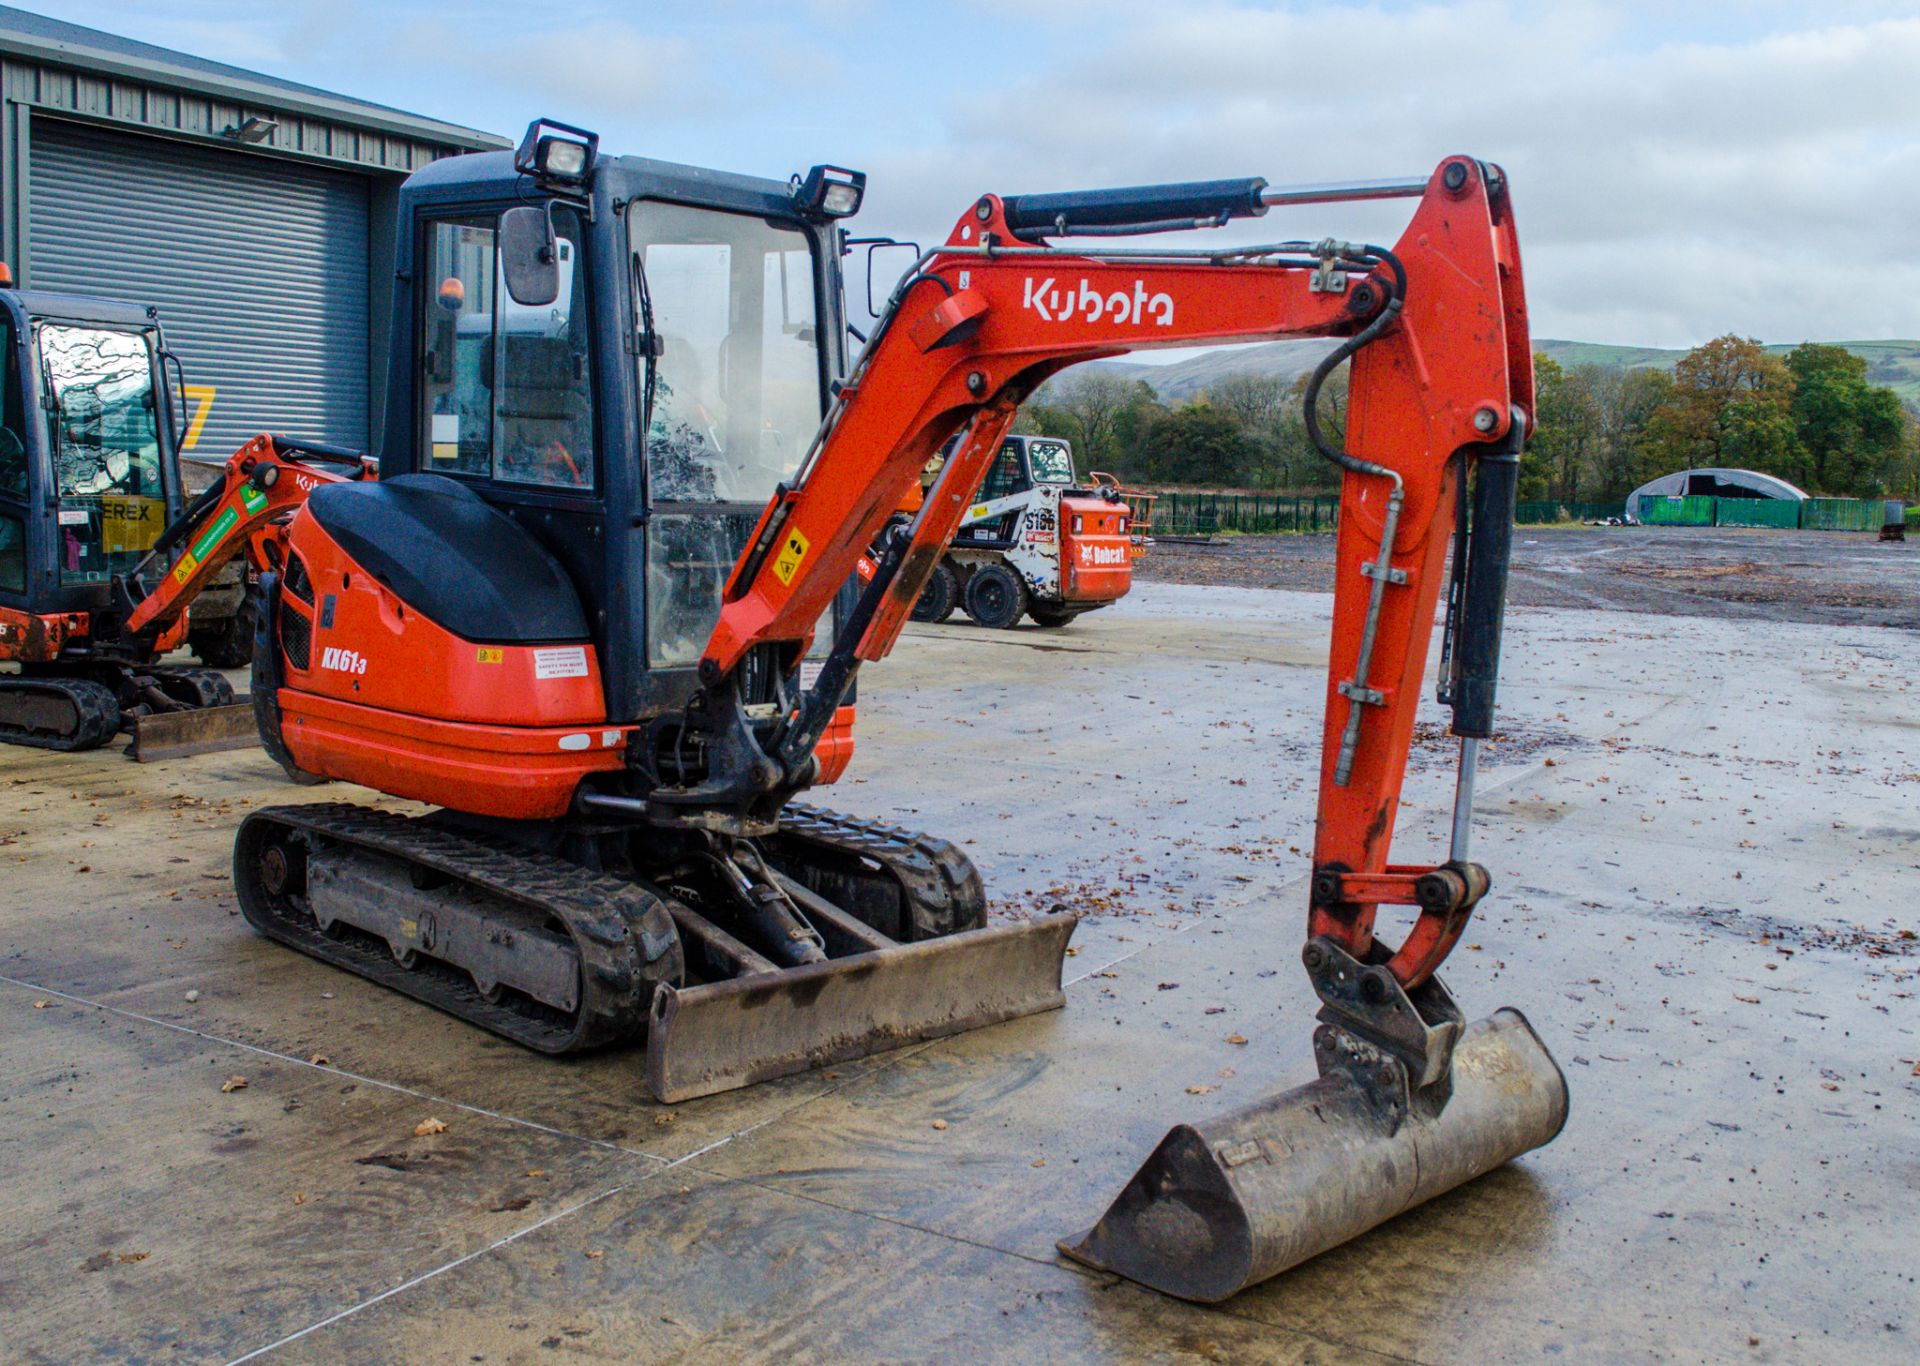 Kubota KX61-3 2.6 tonne rubber tracked excavator Year: 2015 S/N: 81787 Recorded Hours: 2860 EXC149 - Image 2 of 18